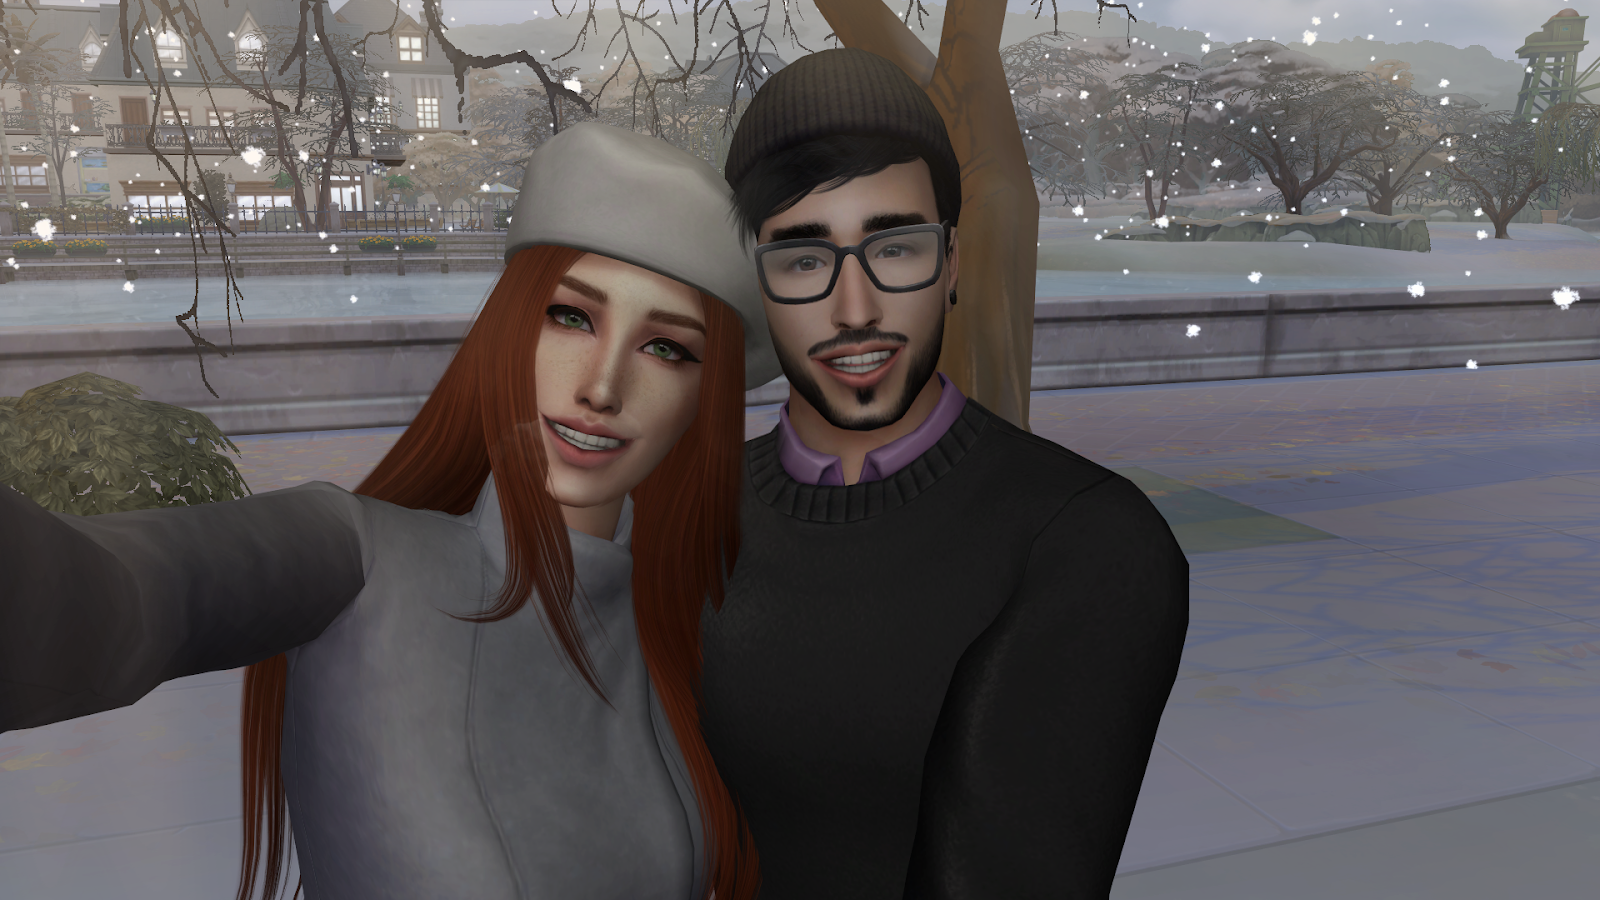 AuB] Posepack 56 | AuB. | Sims 4 couple poses, Sims 4 family, Sims 4  collections